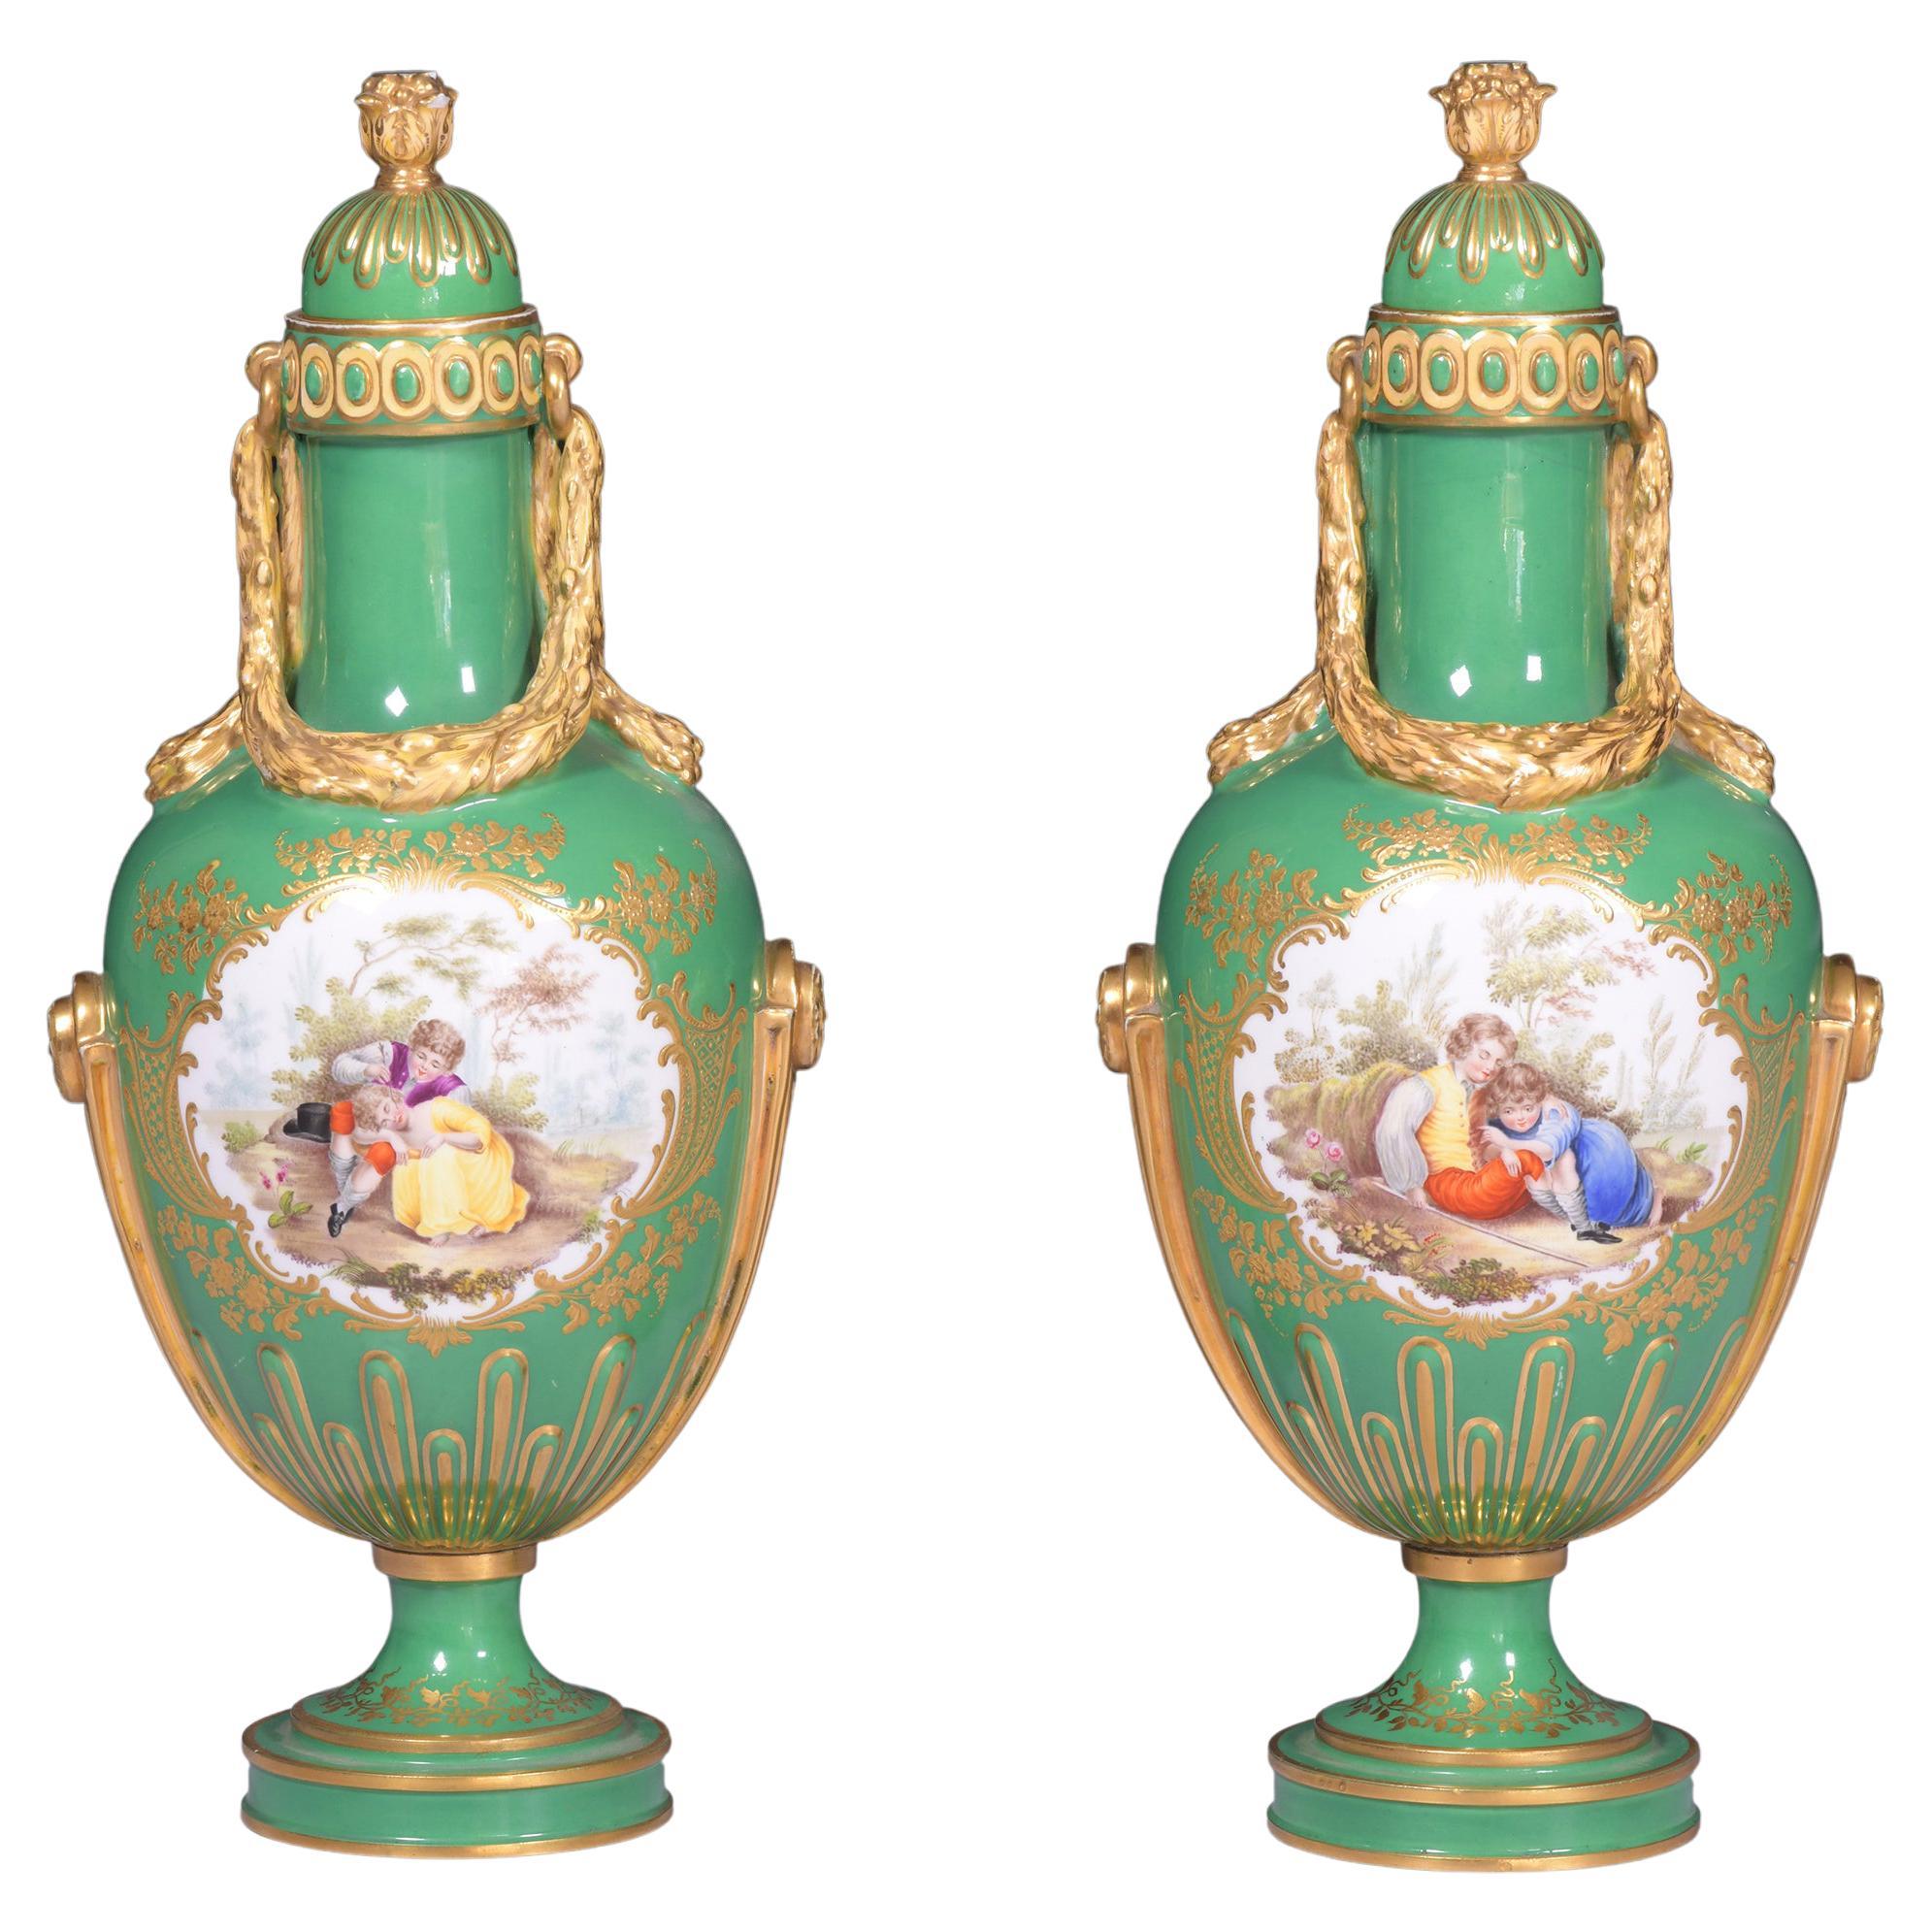 Pair Of 19th Century English Porcelain Vases & Covers By Coalport For Sale